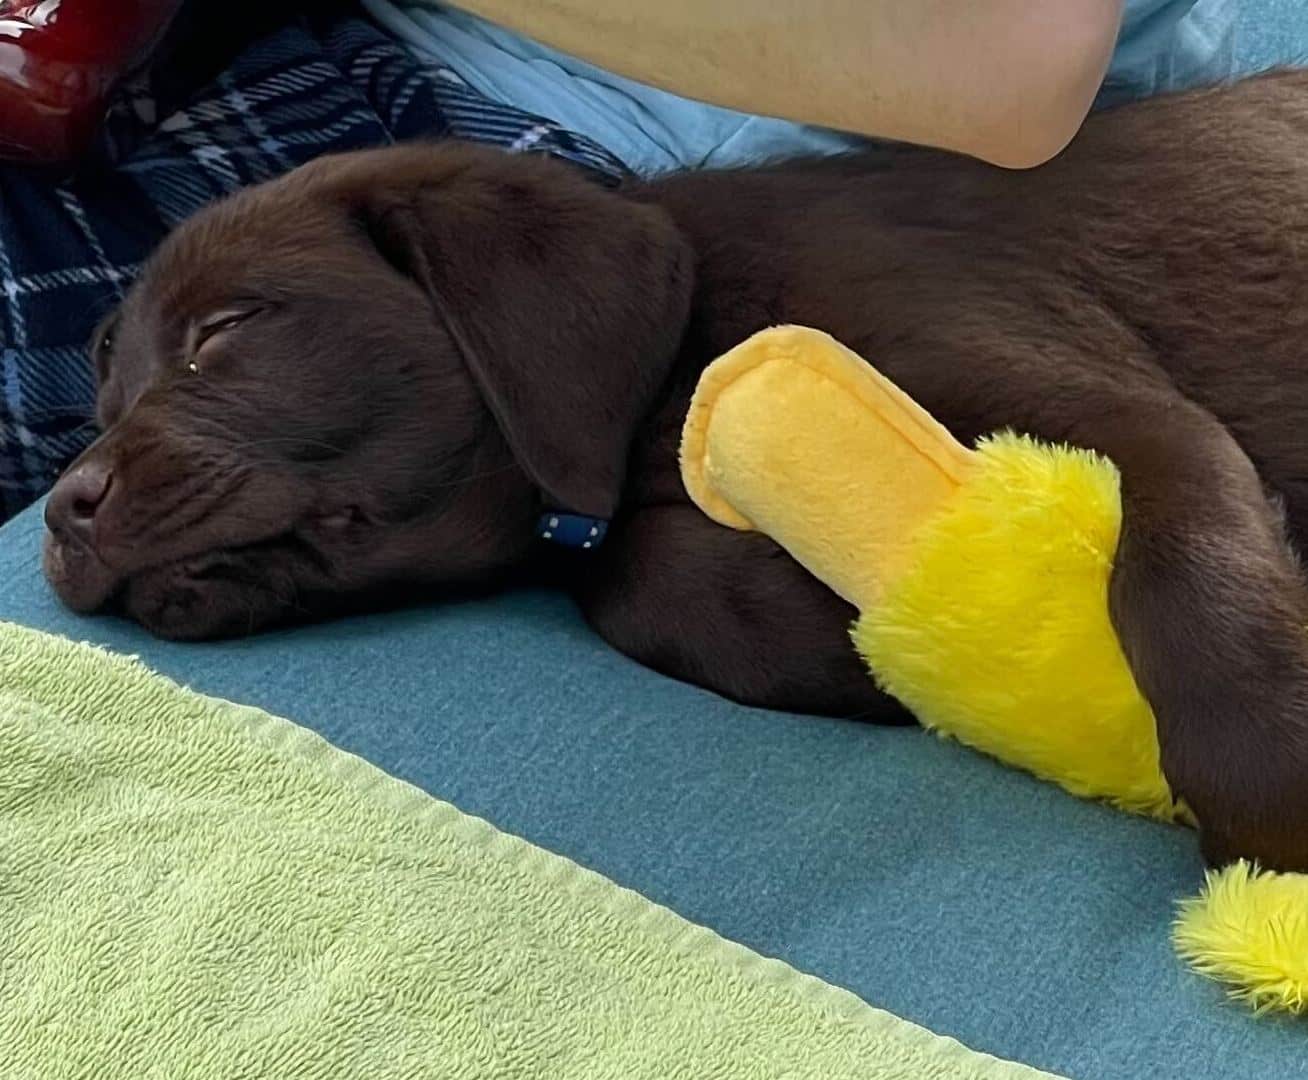 Chocolate lab puppy asleep with a stuffed yellow duck toy